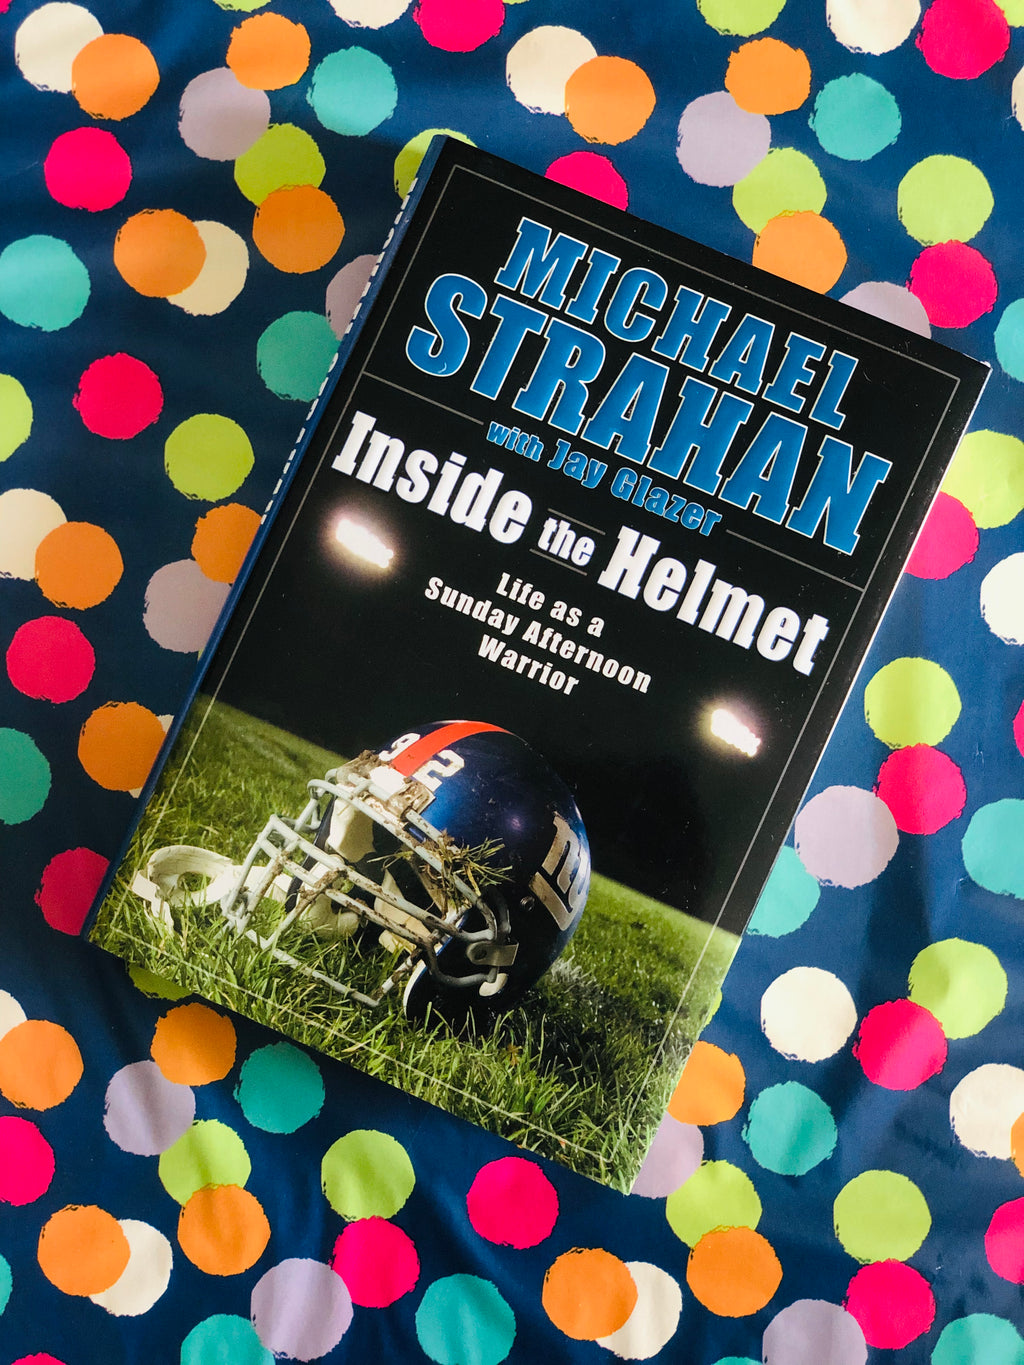 Inside The Helmet Life As A Sunday Afternoon Warrior- By Michael Strahan with Jay Glazer